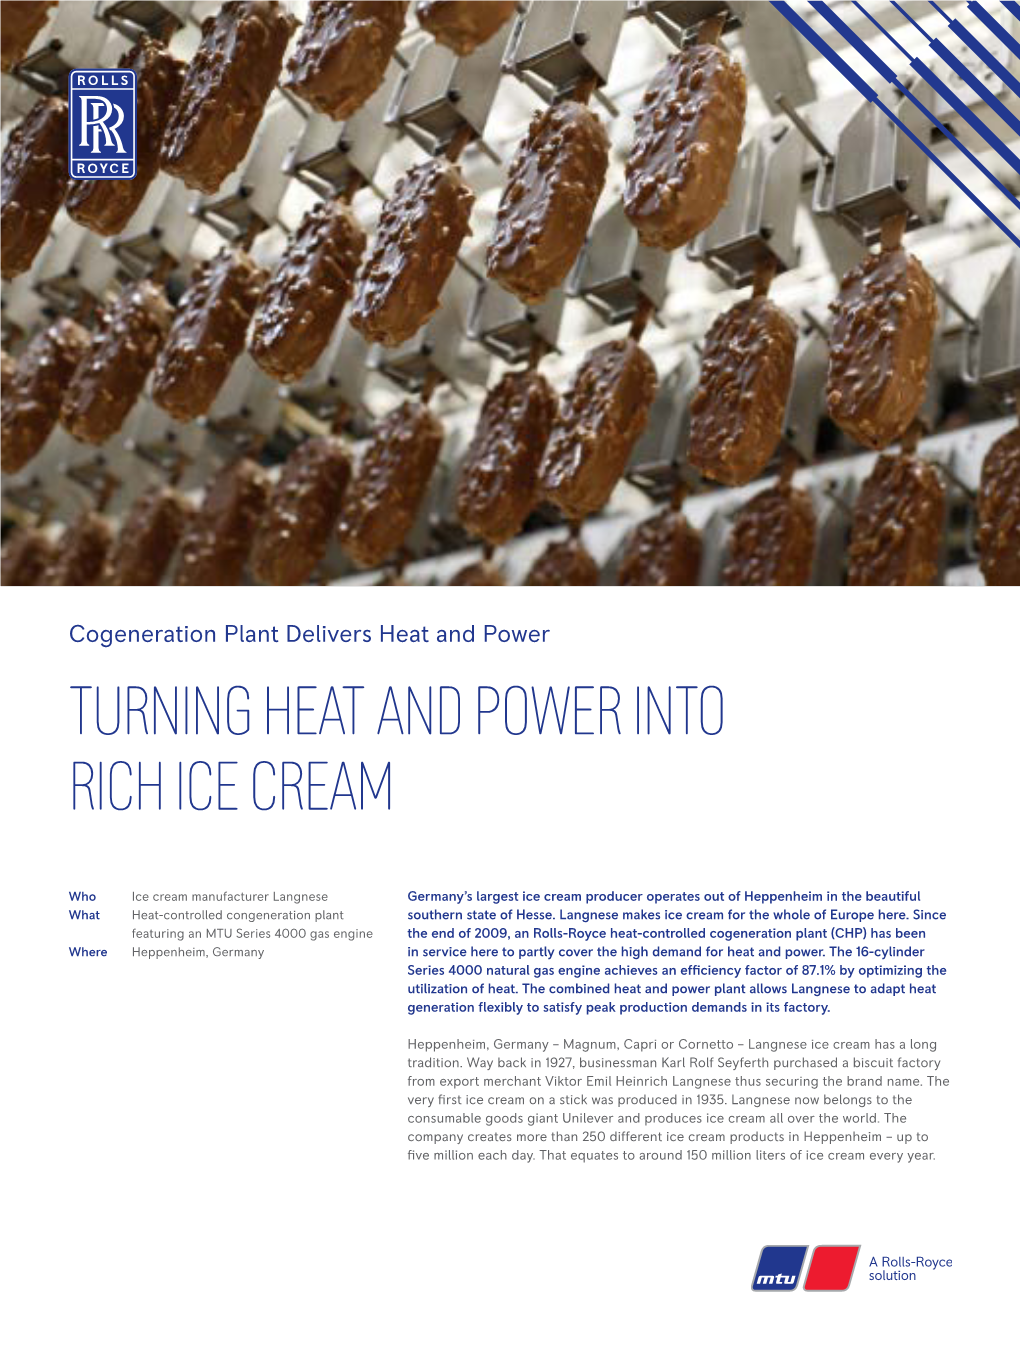 Turning Heat and Power Into Rich Ice Cream